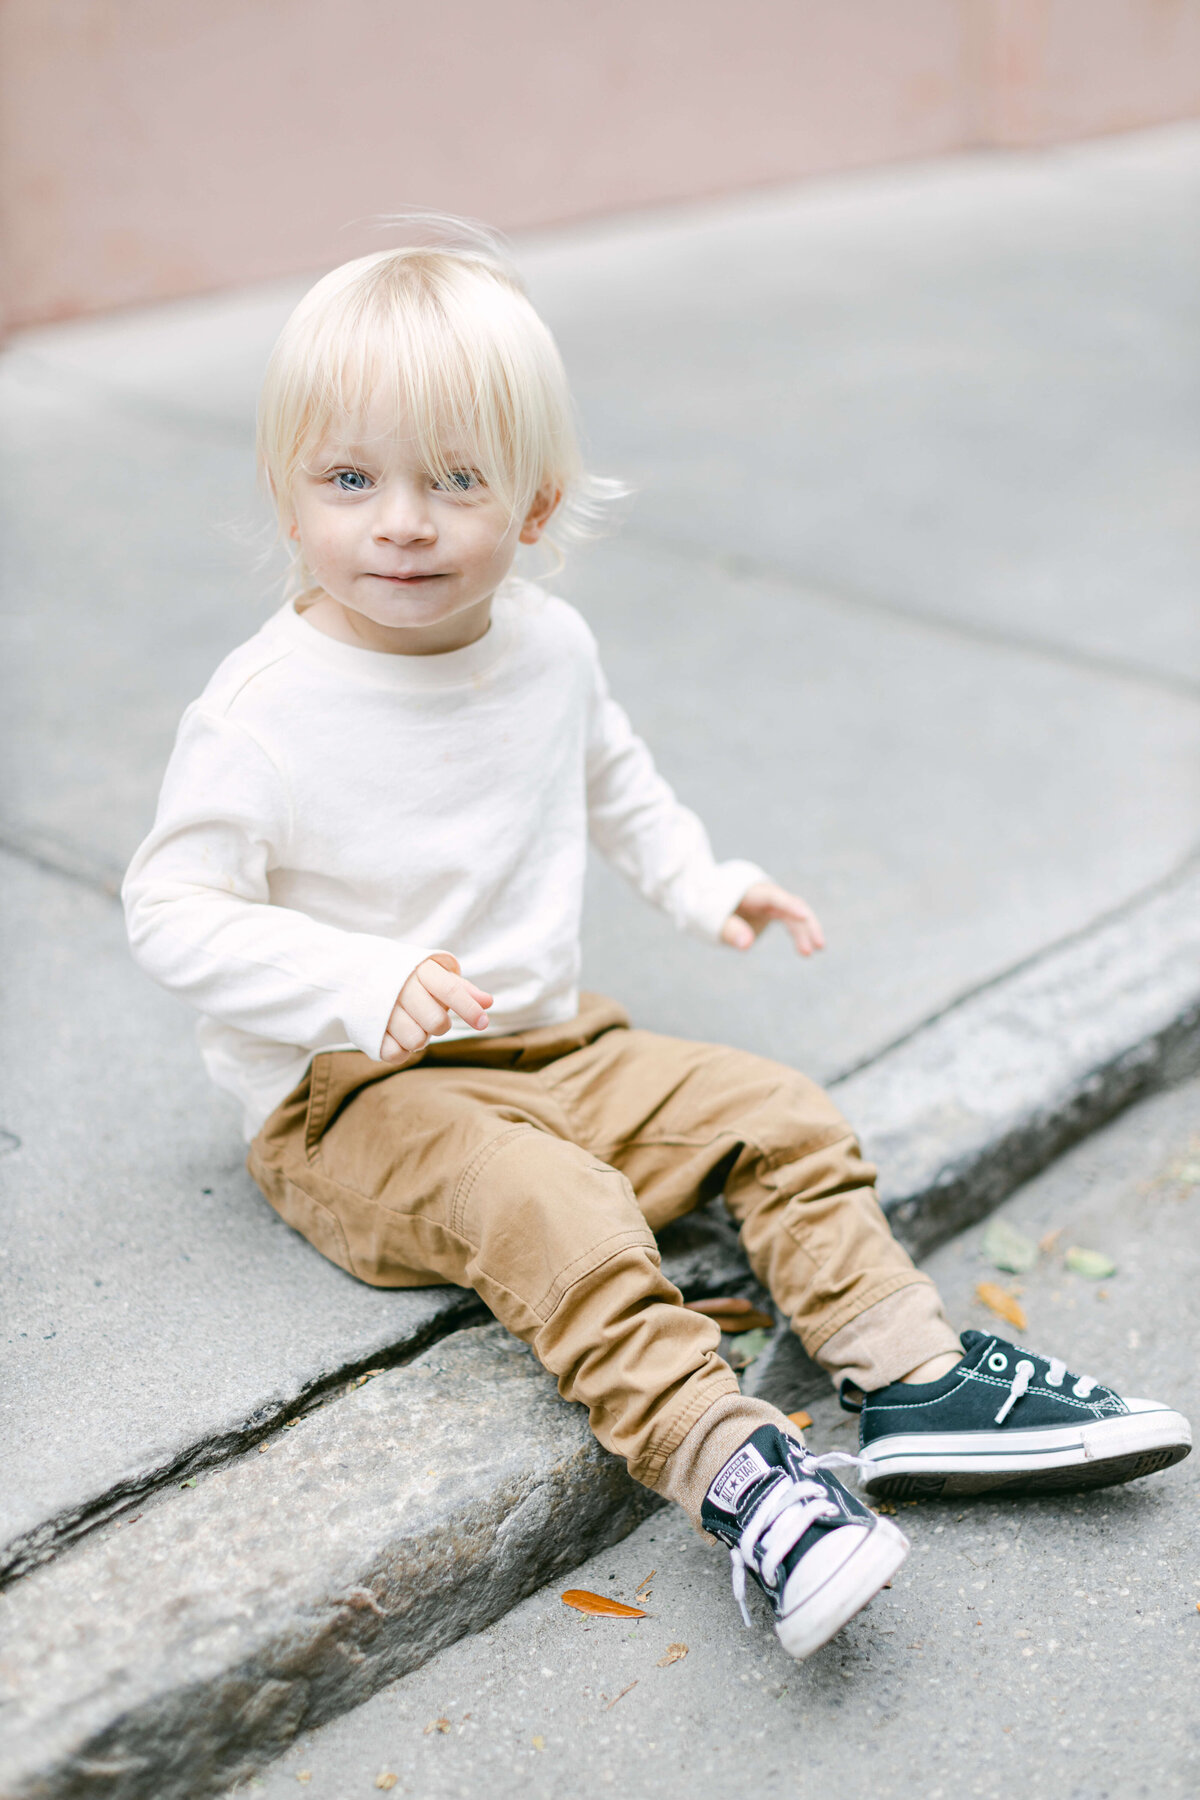 A small blonde child with blue eyes sits on a curb.